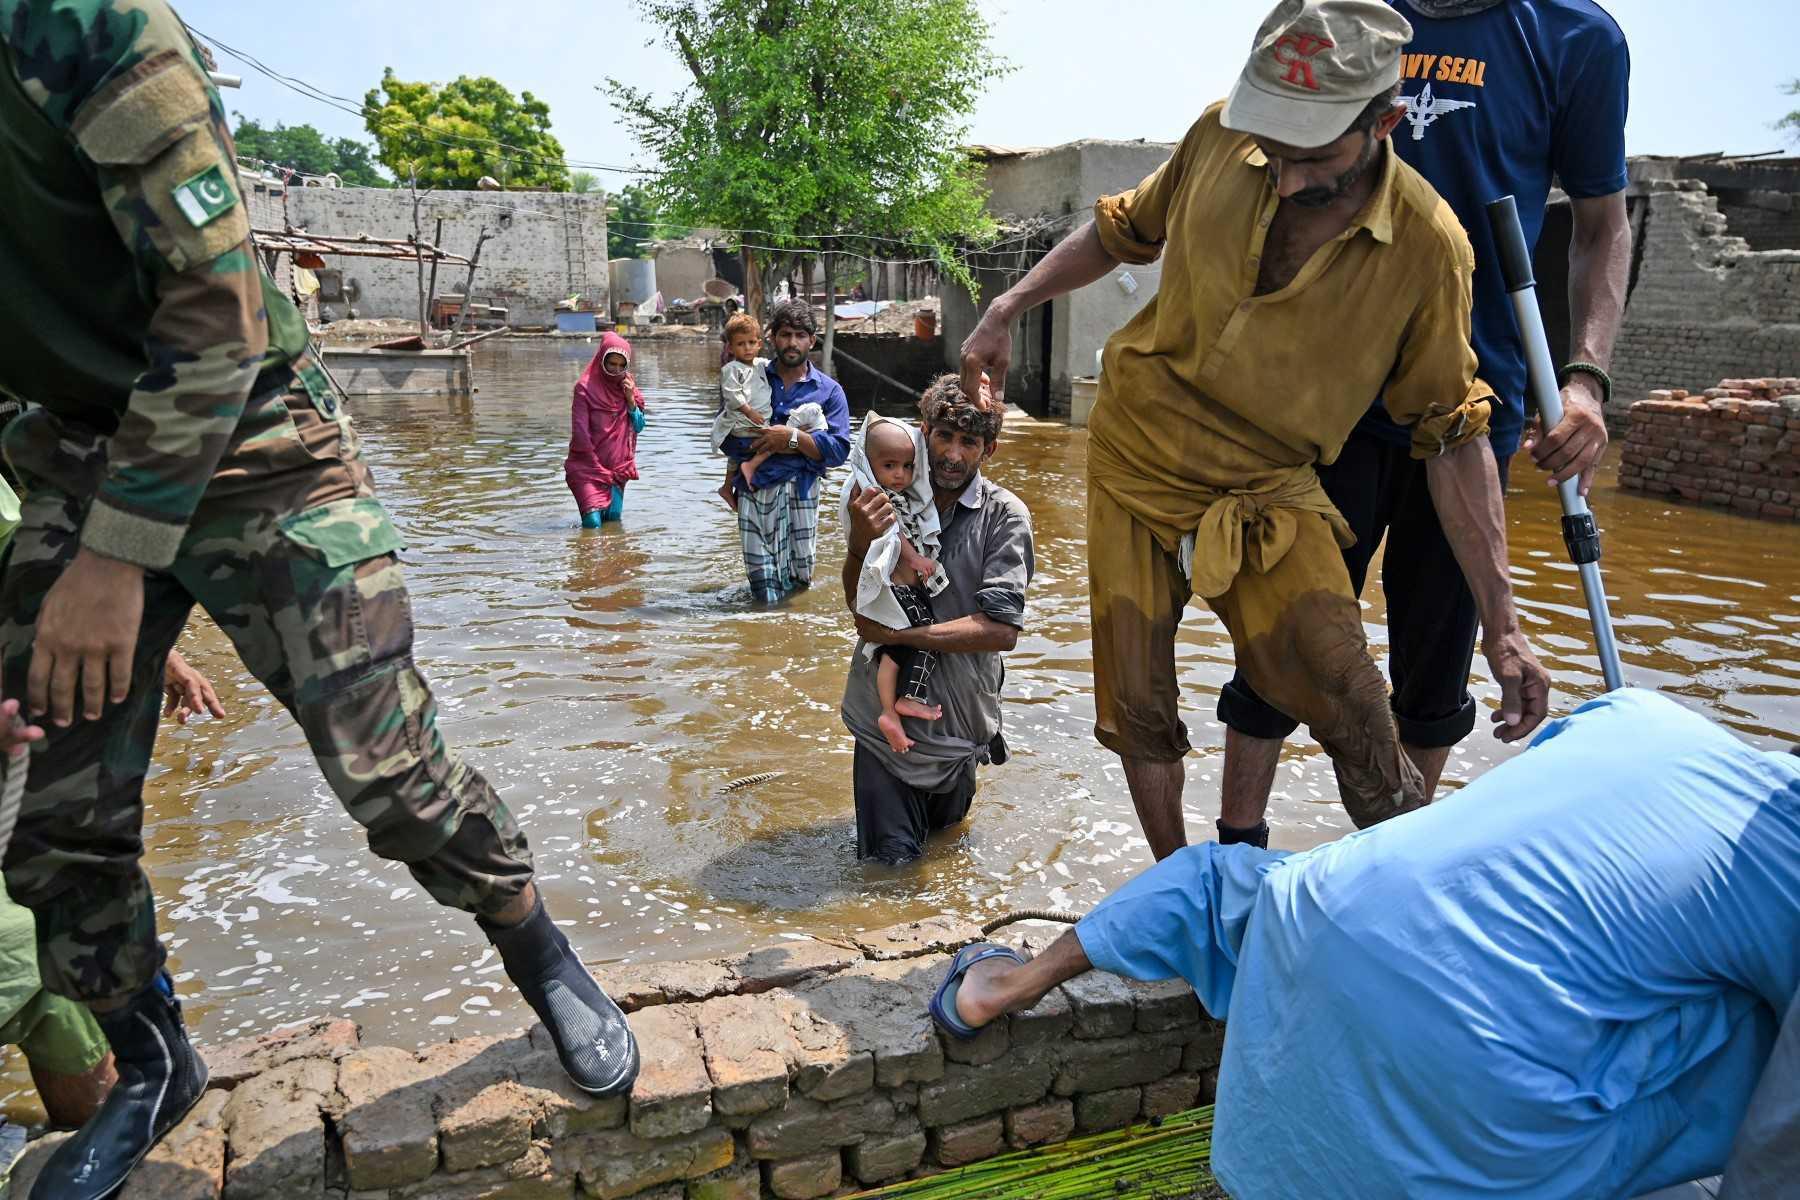 Pakistan's navy personnel rescue flood-affected people from their damaged houses after heavy monsoon rains in Dadu district, Sindh province on Sept 7. Photo: AFP